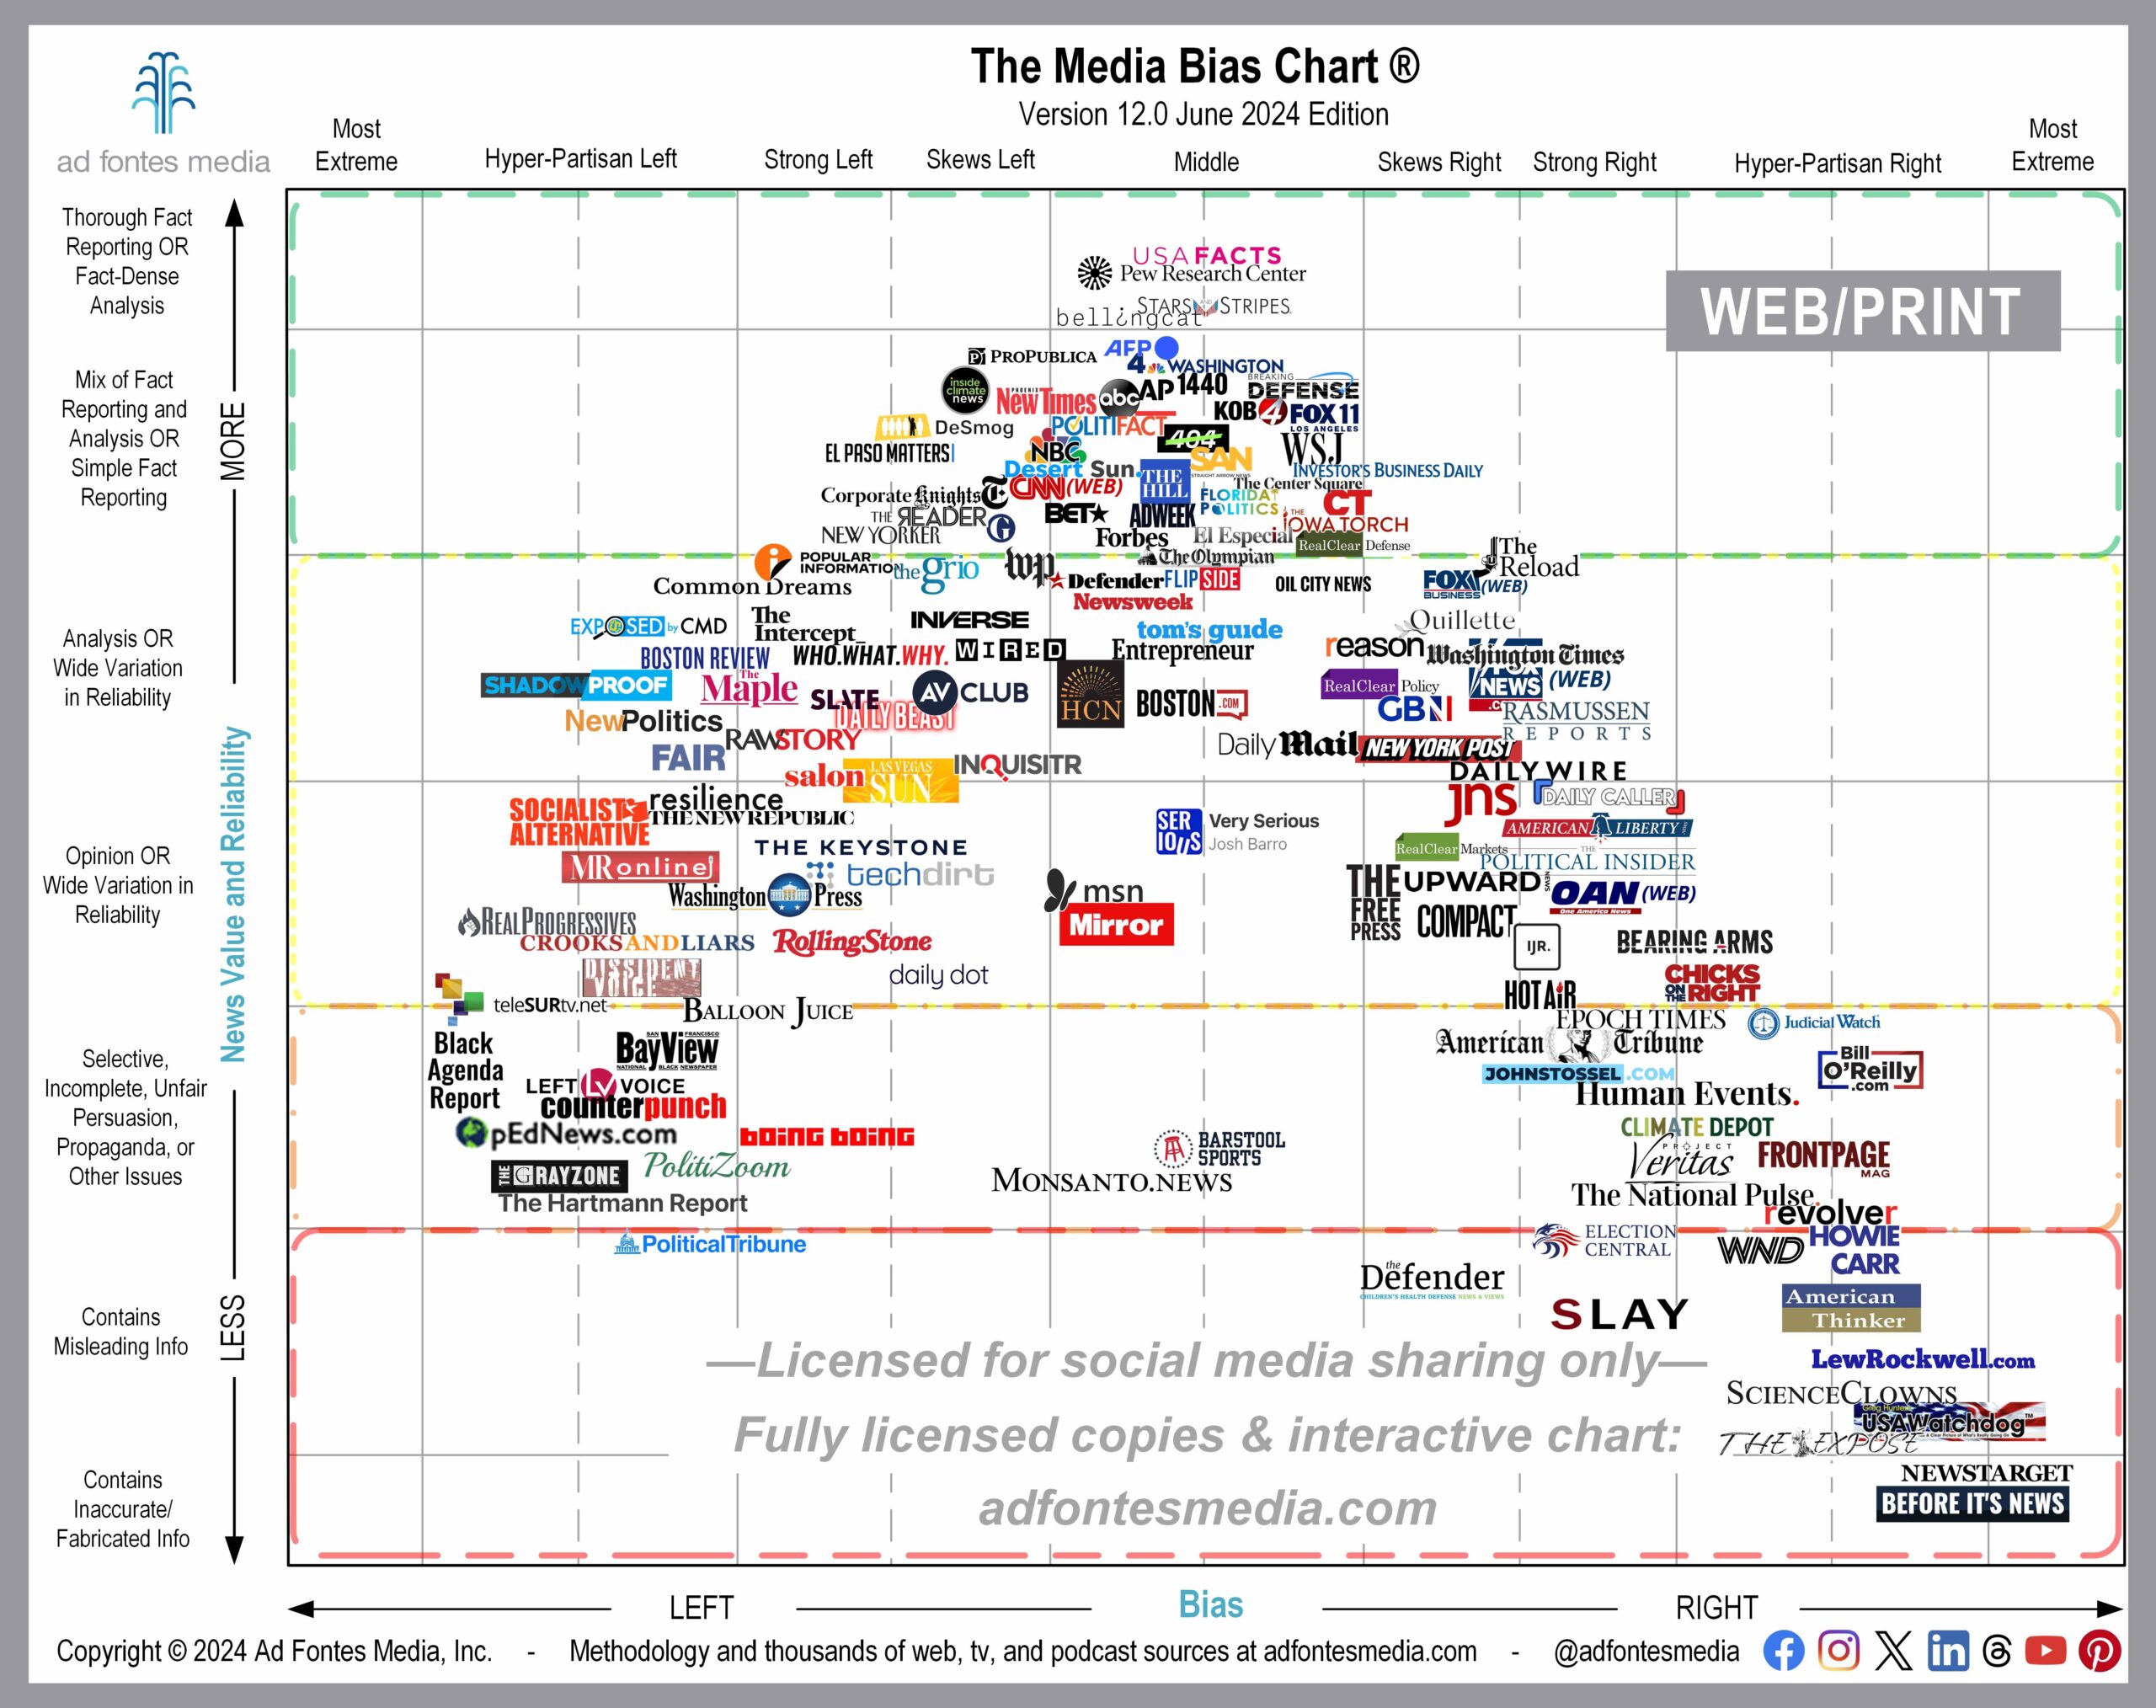 June web/print chart features 146 sources, 11 of them for the first time